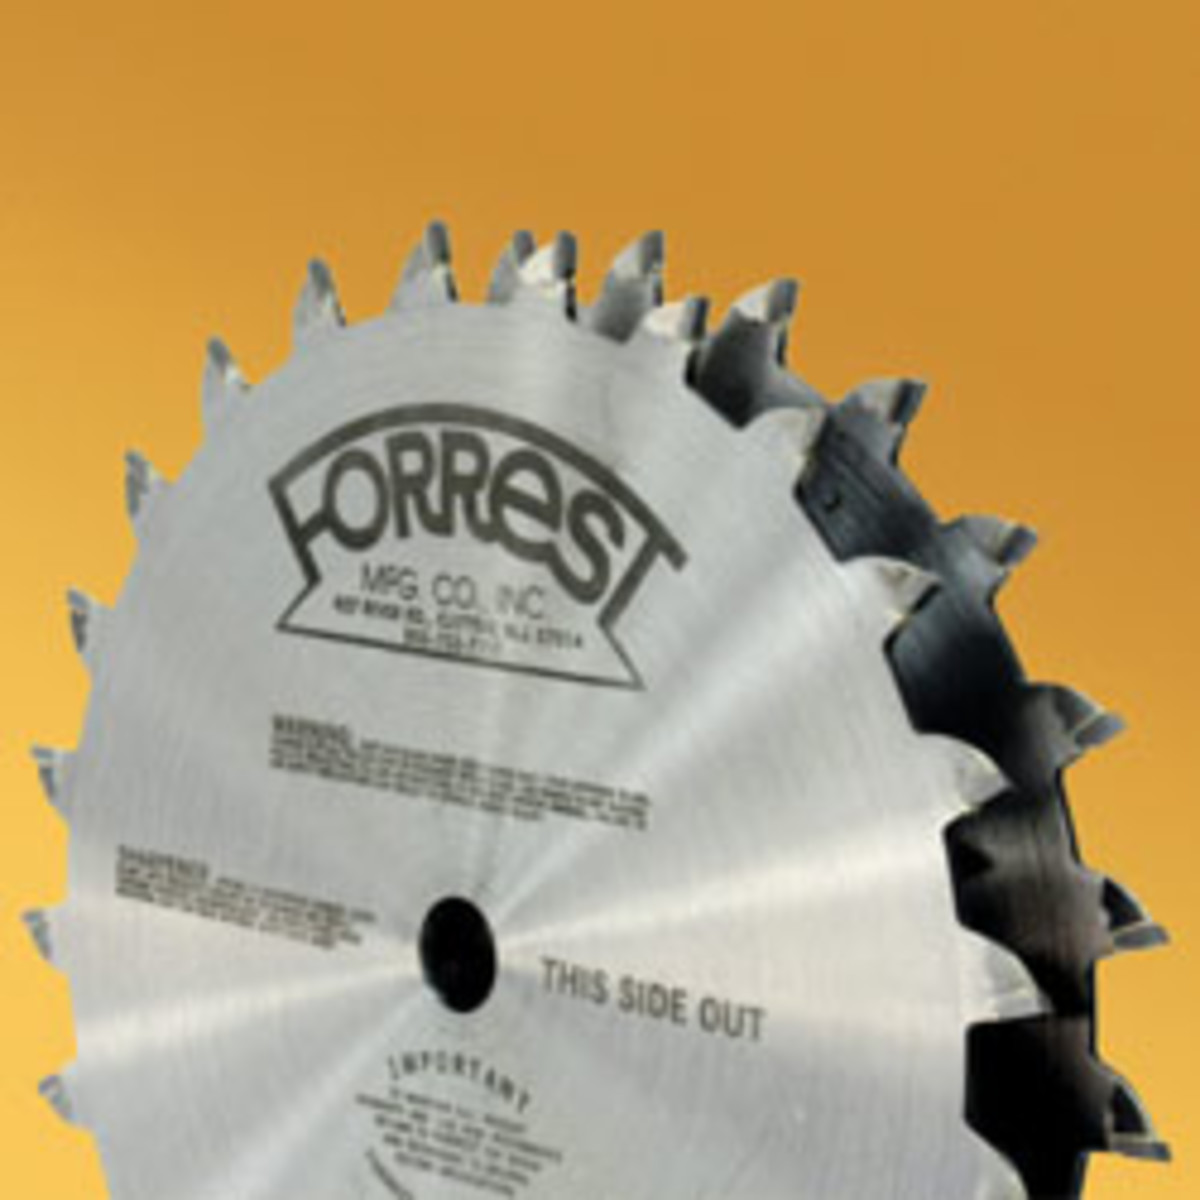 Among Forrest Manufacturing’s new blades is this 8” diameter thin kerf dado set (DK0824316) that was designed for clean-cutting 3/16” wide grooves.